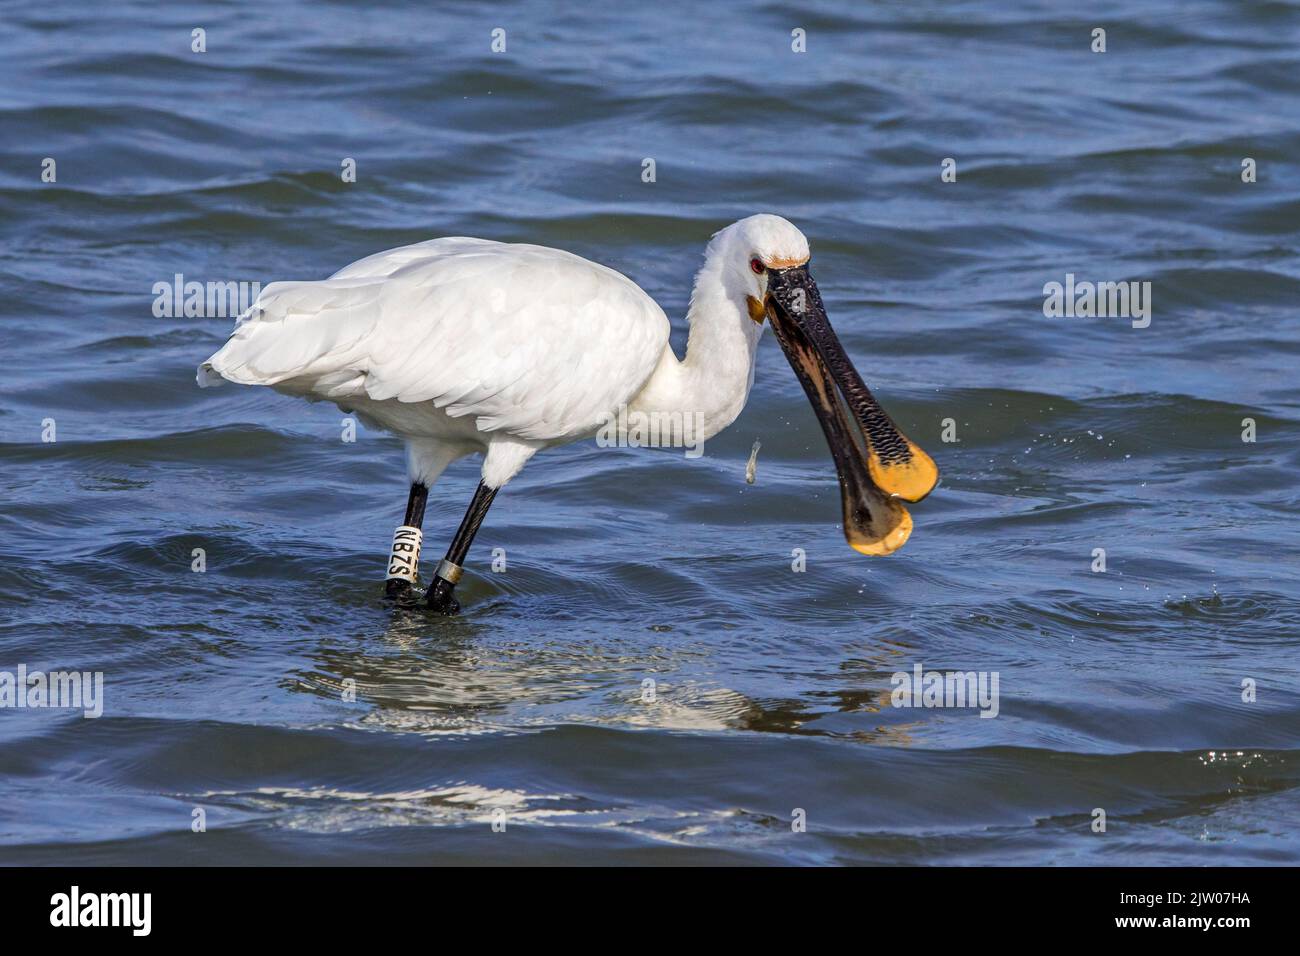 Eurasian spoonbill / common spoonbill (Platalea leucorodia) ringed adult losing caught goby fish in shallow water of lake at wetland in late summer Stock Photo